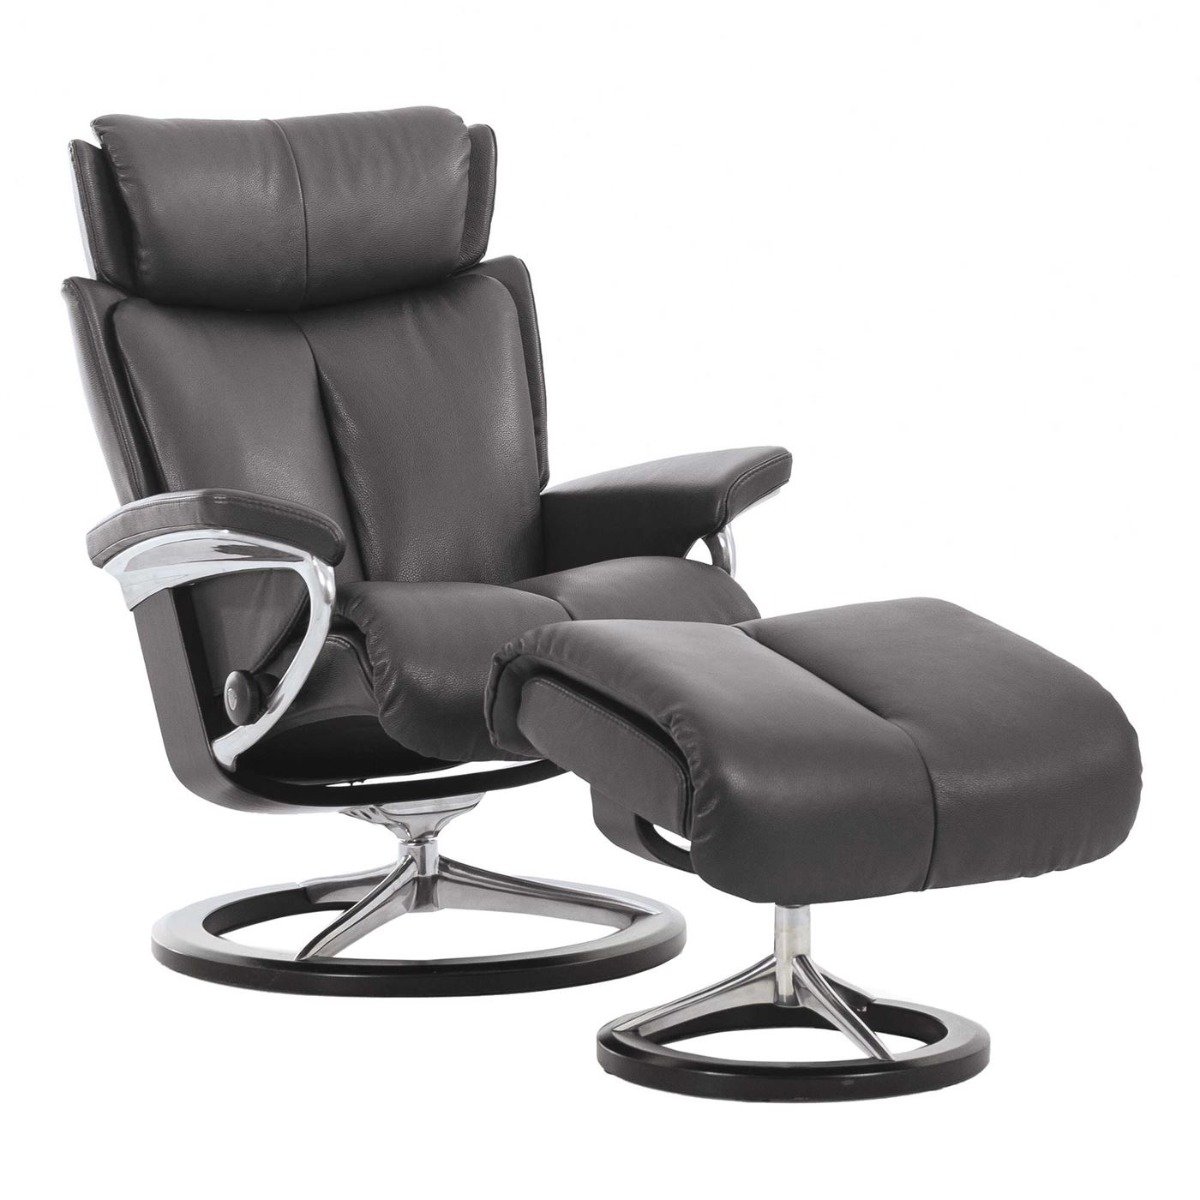 Stressless Magic Medium Recliner Chair & Stool With Signature Base, Black Leather | Barker & Stonehouse